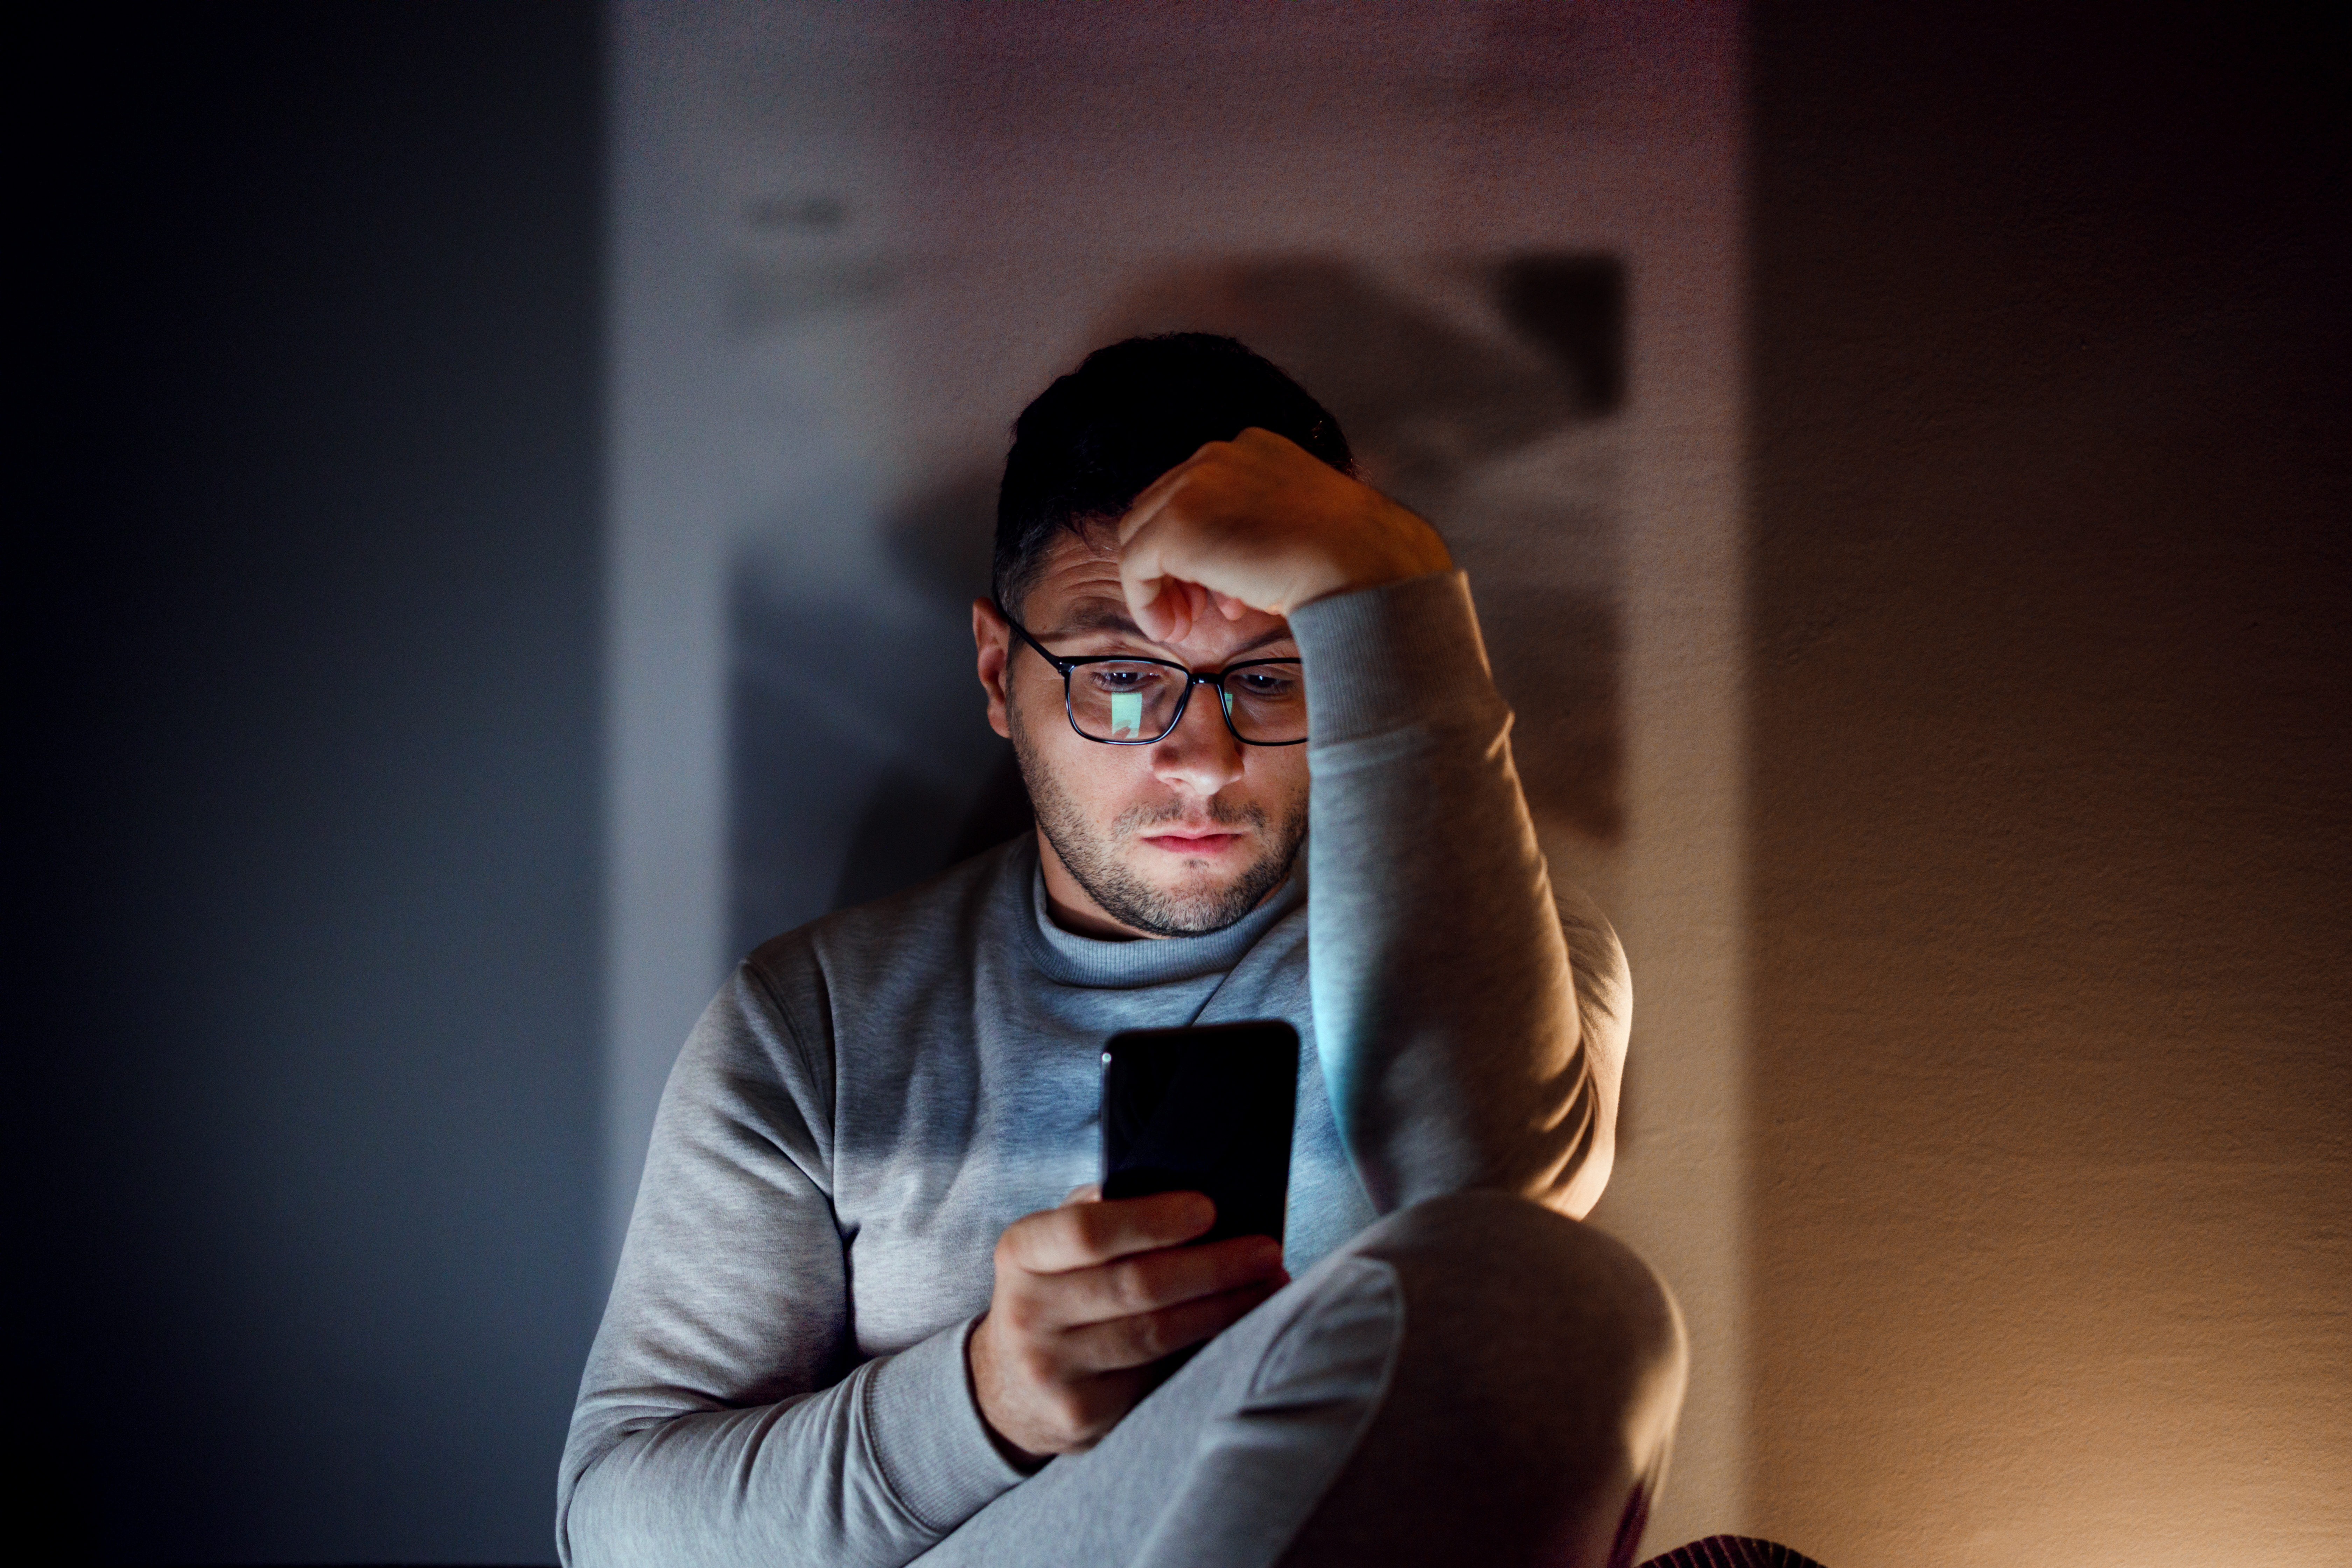 Man sitting in the dark and looking at a cellphone